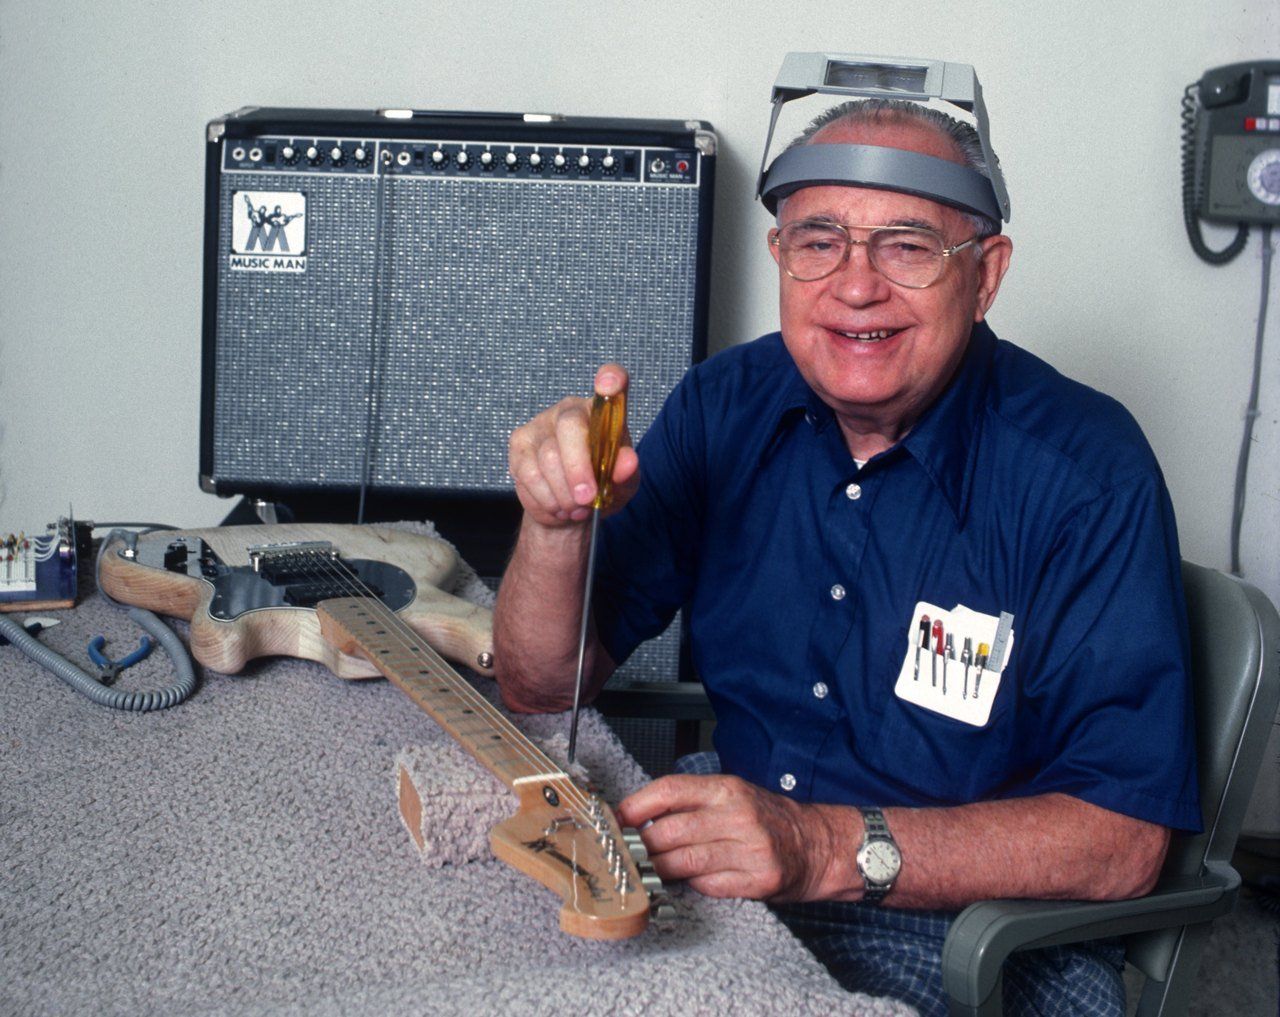 Leo Fender during the Music Man era working on a Sting Ray II guitar